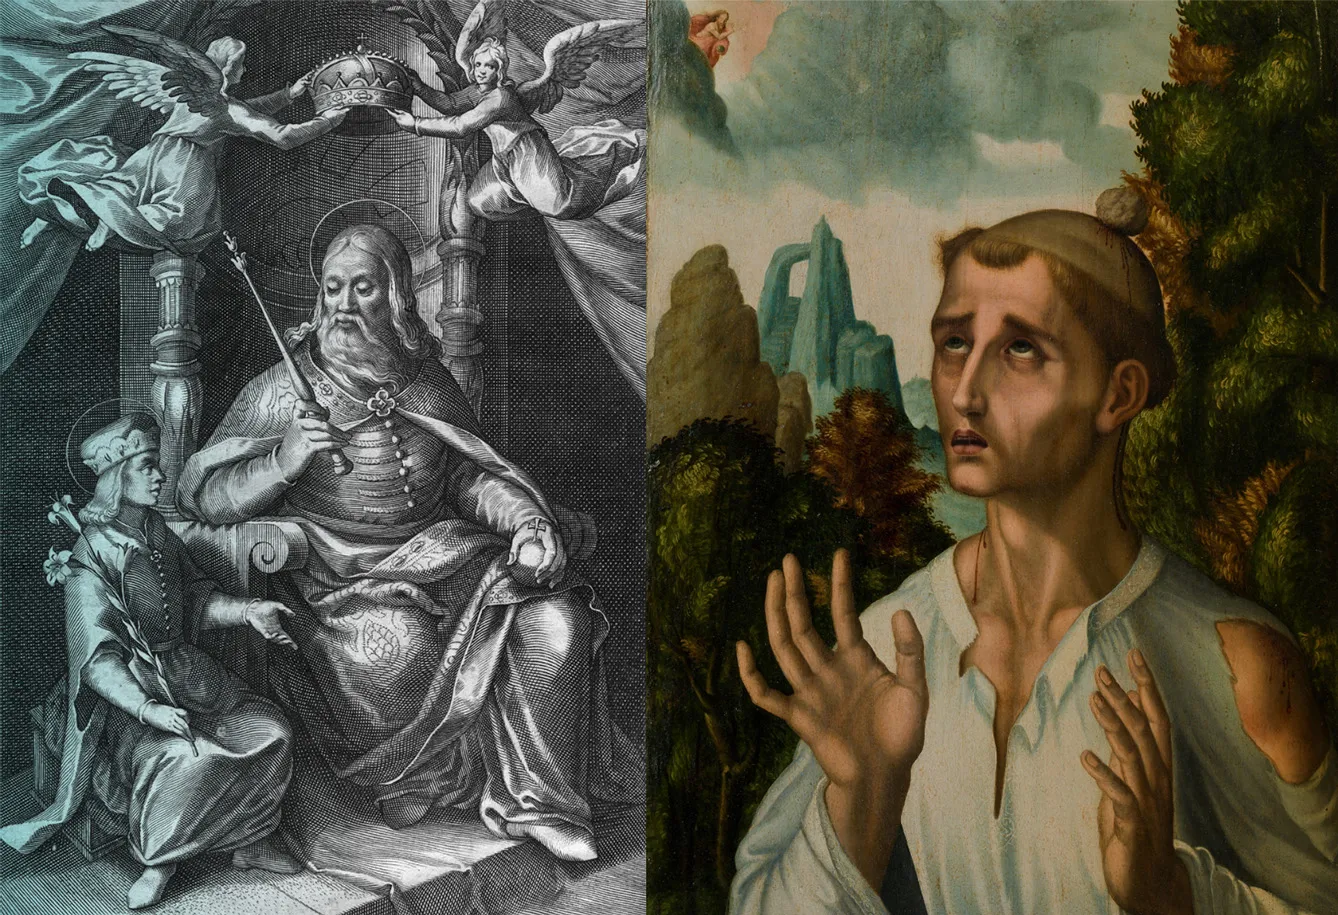 Left: Circa 1038, King Stephen I of Hungary (979 - 1038), canonized by the Pope in 1083. Right: Saint Stephen painting by Luis de Morales